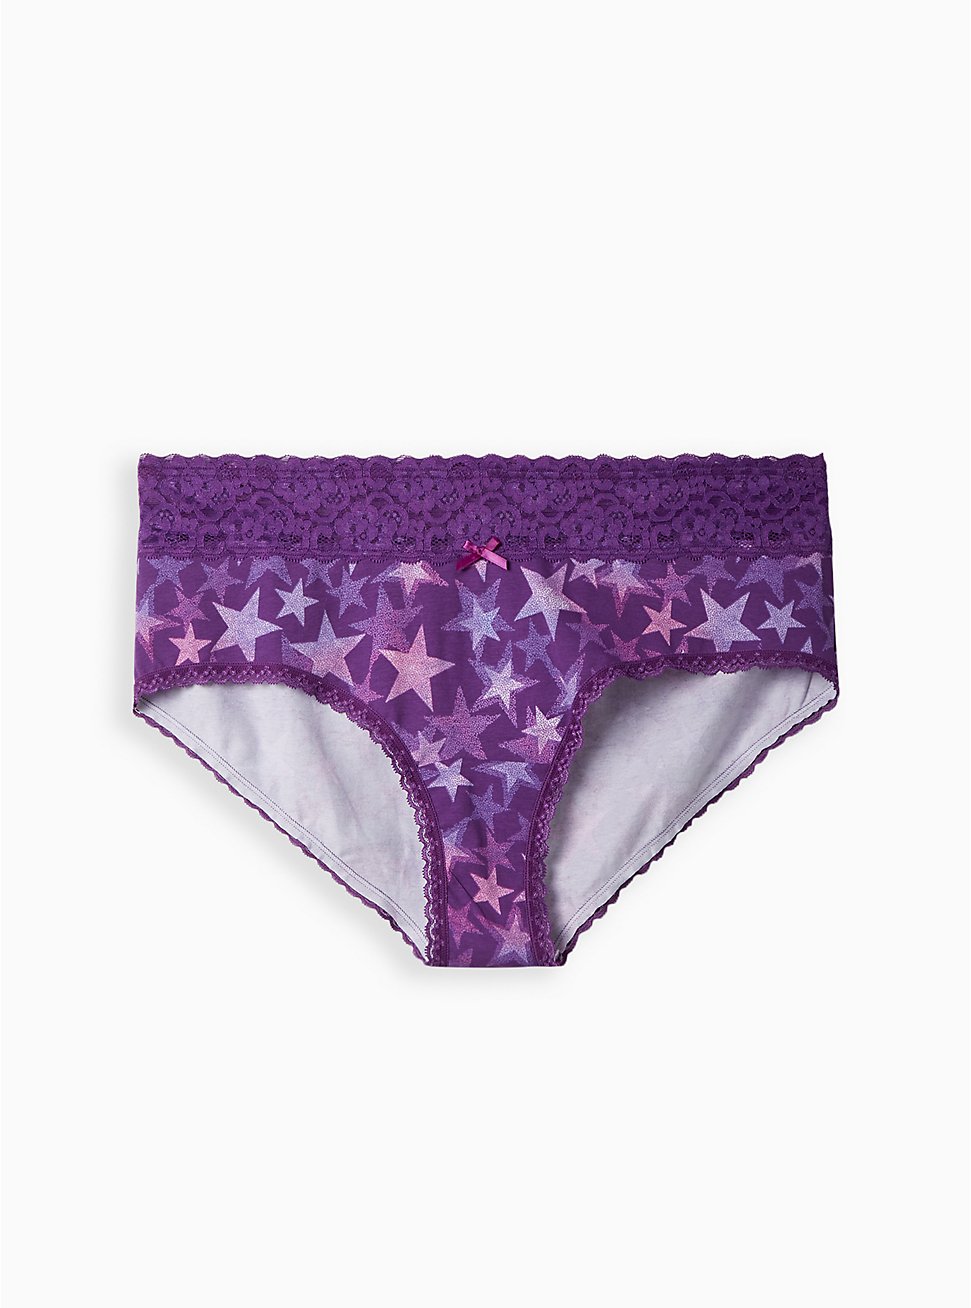 Cotton Mid-Rise Cheeky Lace Trim Panty, DOTTED STAR PURPLE, hi-res